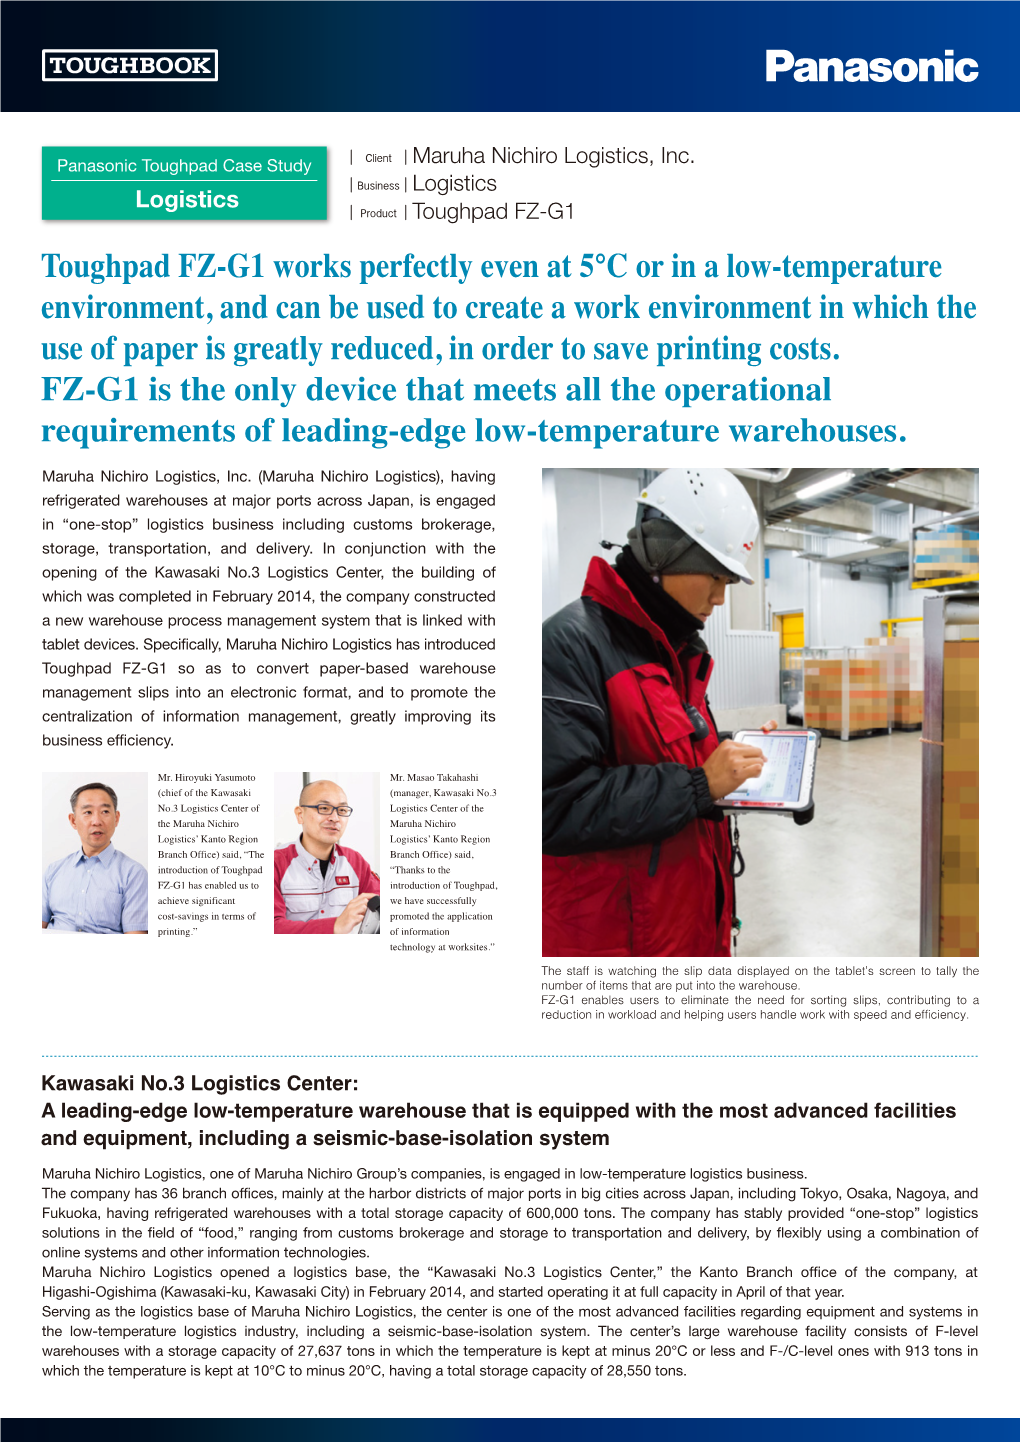 Toughpad FZ-G1 Works Perfectly Even at 5°C Or in a Low-Temperature